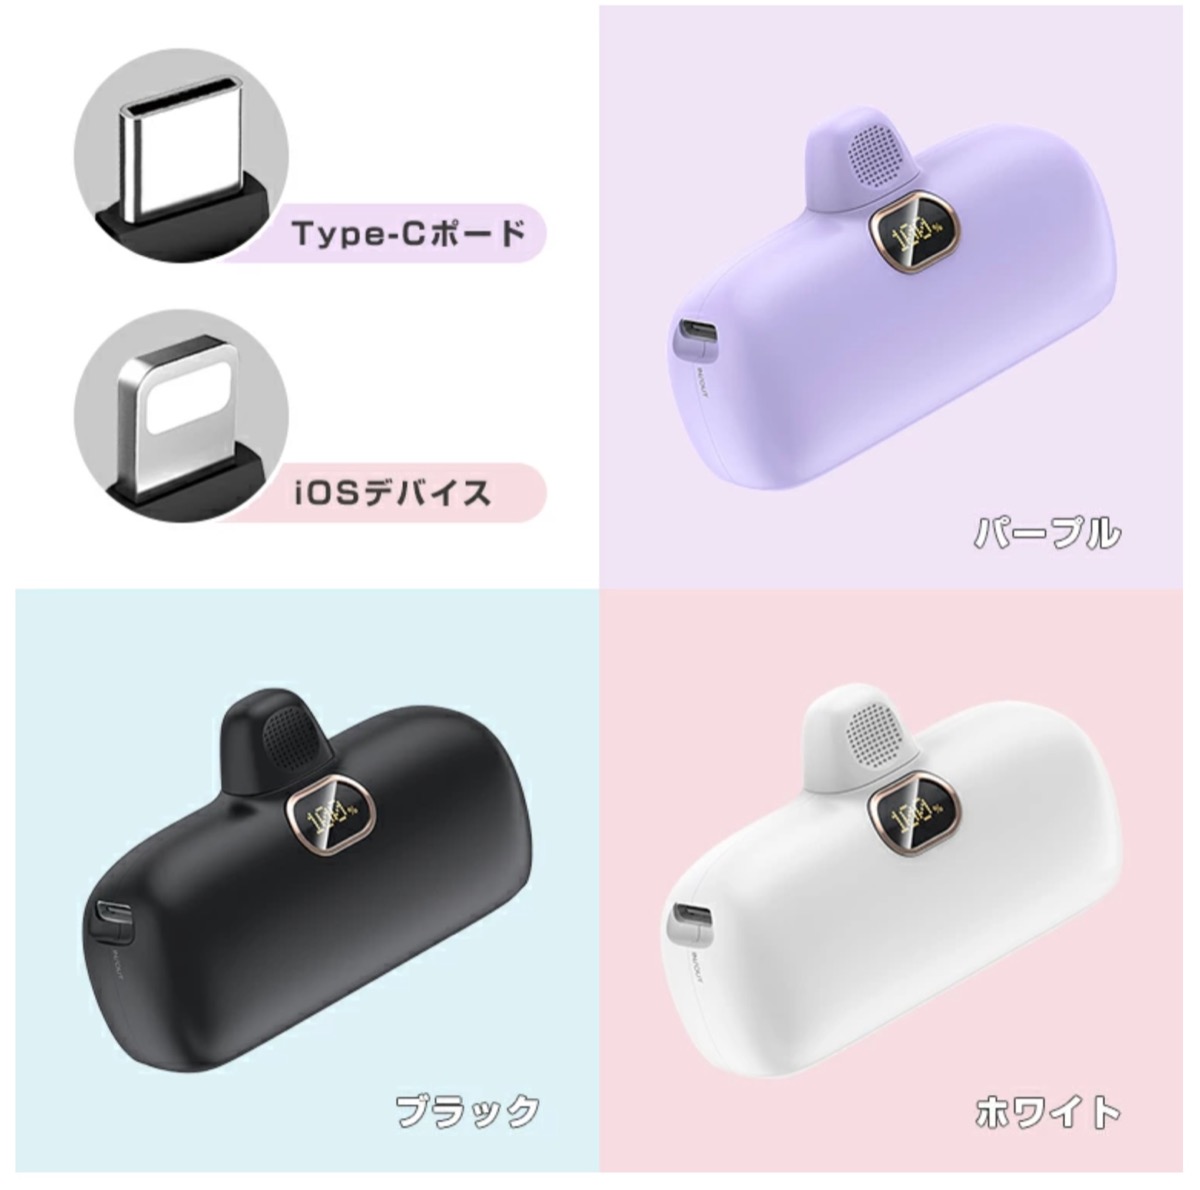 Ll smartphone accessories 19カラーバリエーション